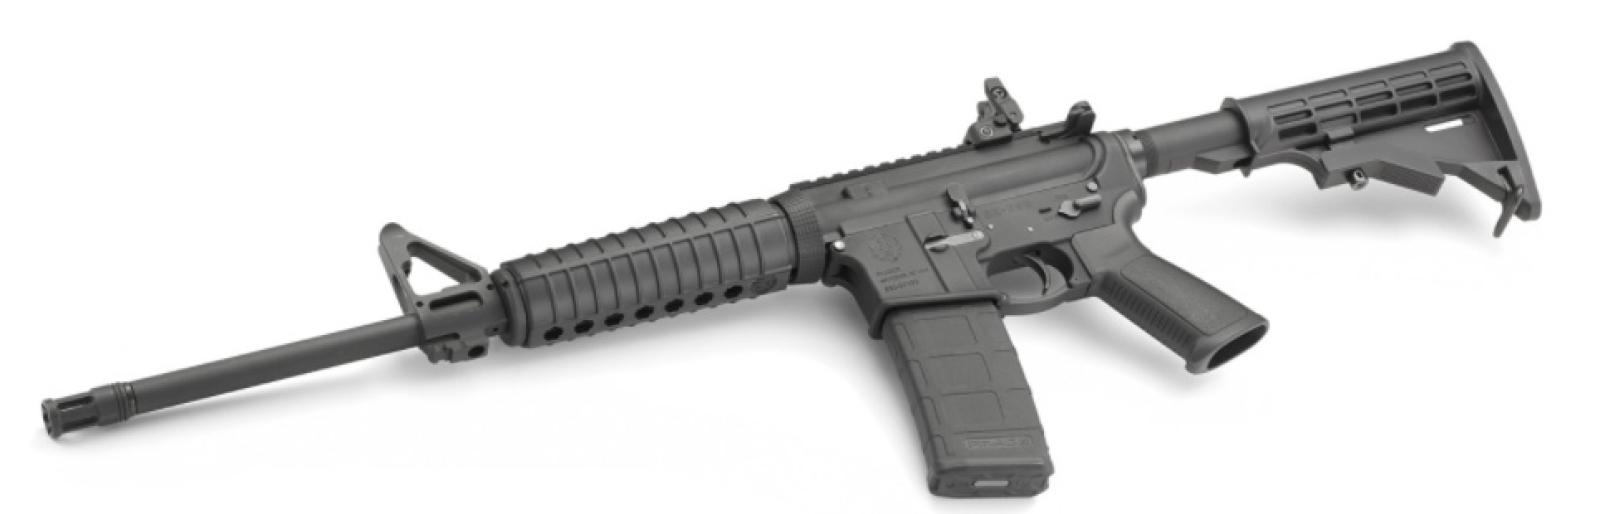 Ruger AR-556® : Standard  Model 08500  5.56 NATO - Autoloading Rifle Laying Down